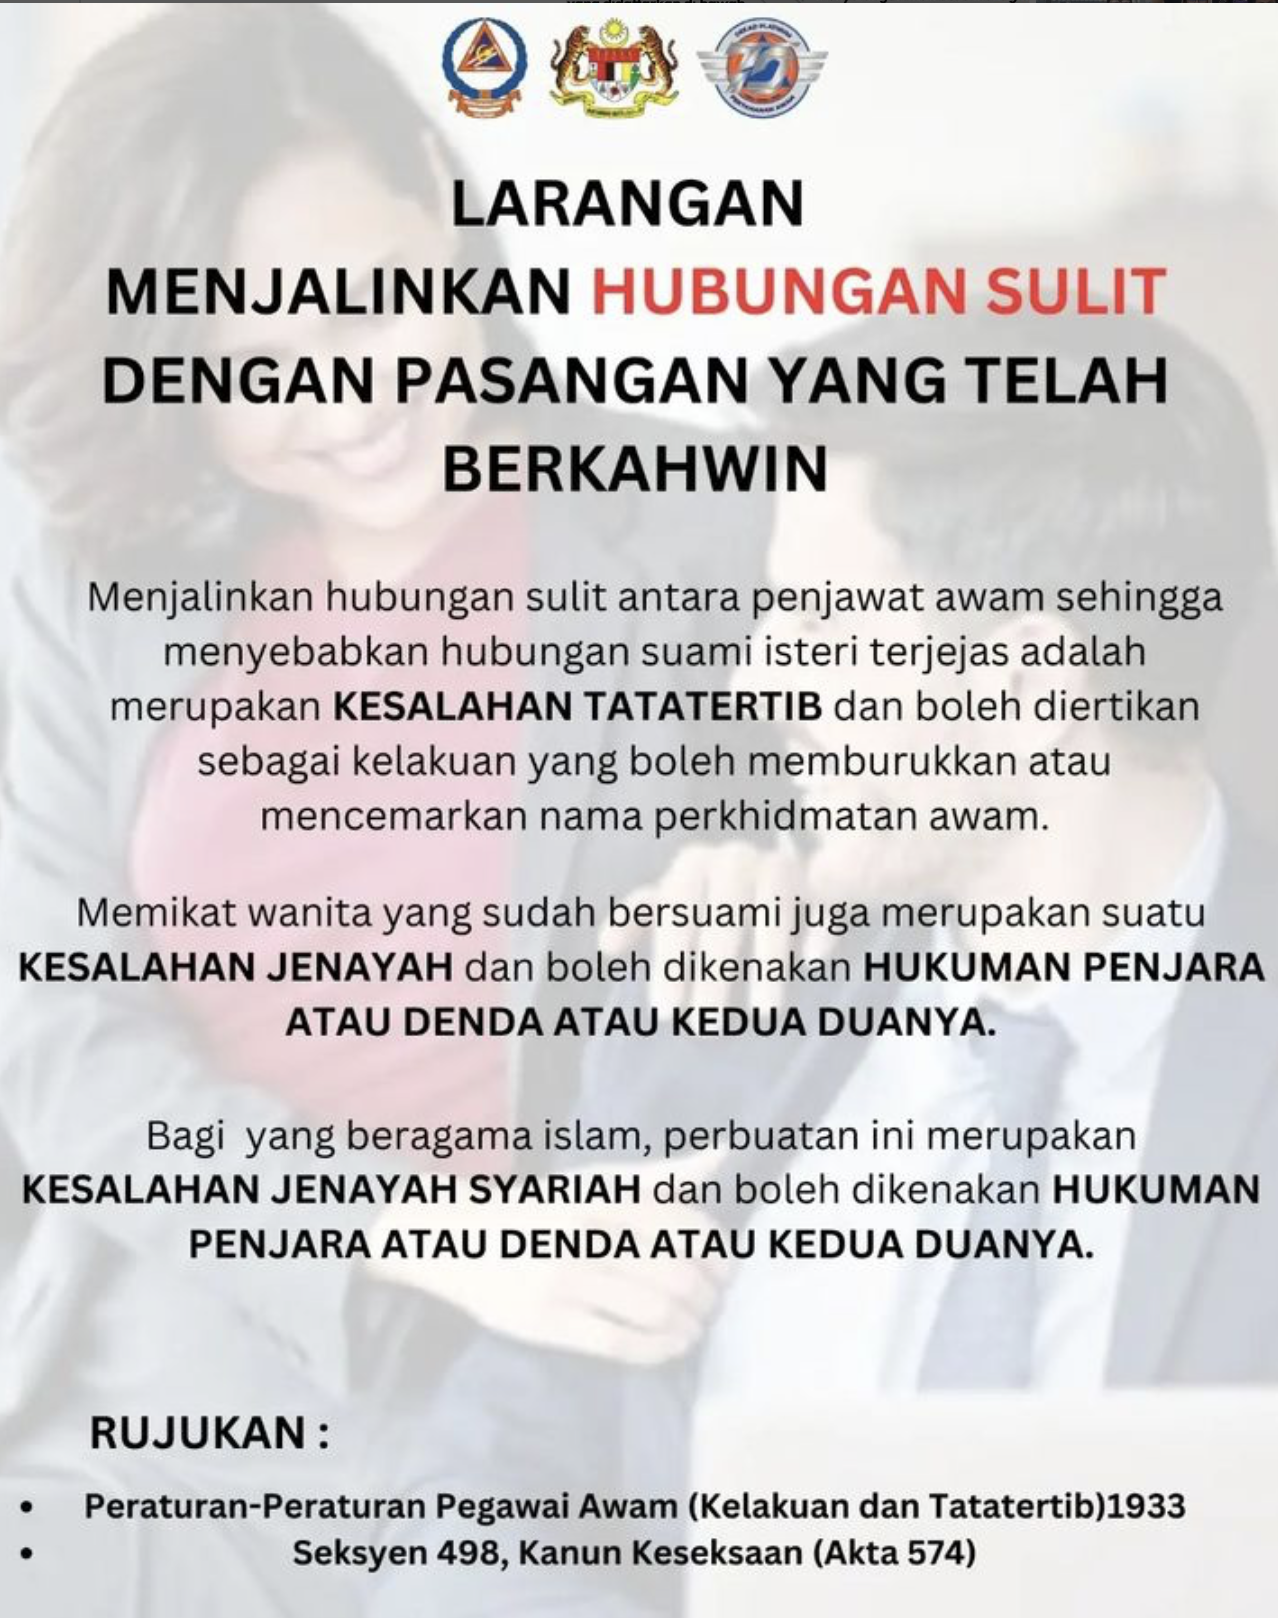 Apm poster about warning public servant on extramaritial affairs 1